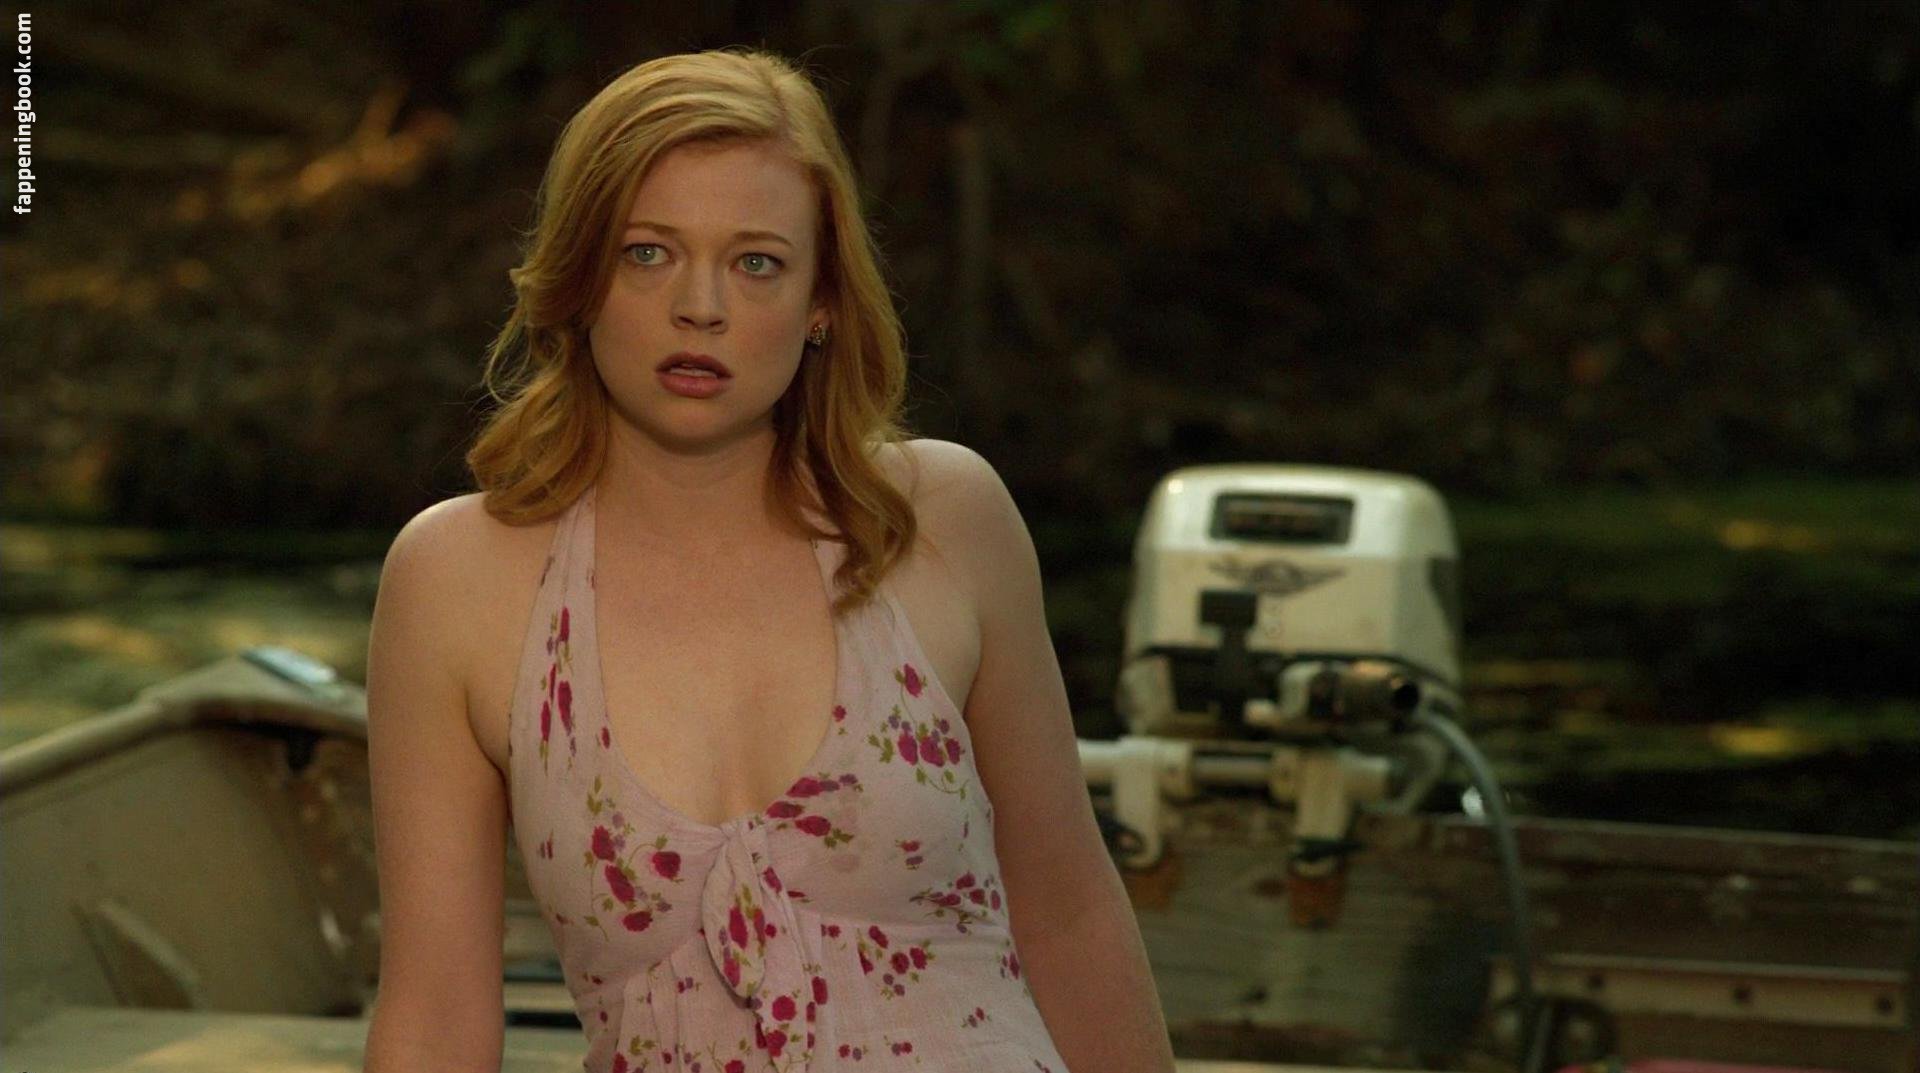 Sarah Snook Nude, The Fappening - Photo #483587 - FappeningBook.